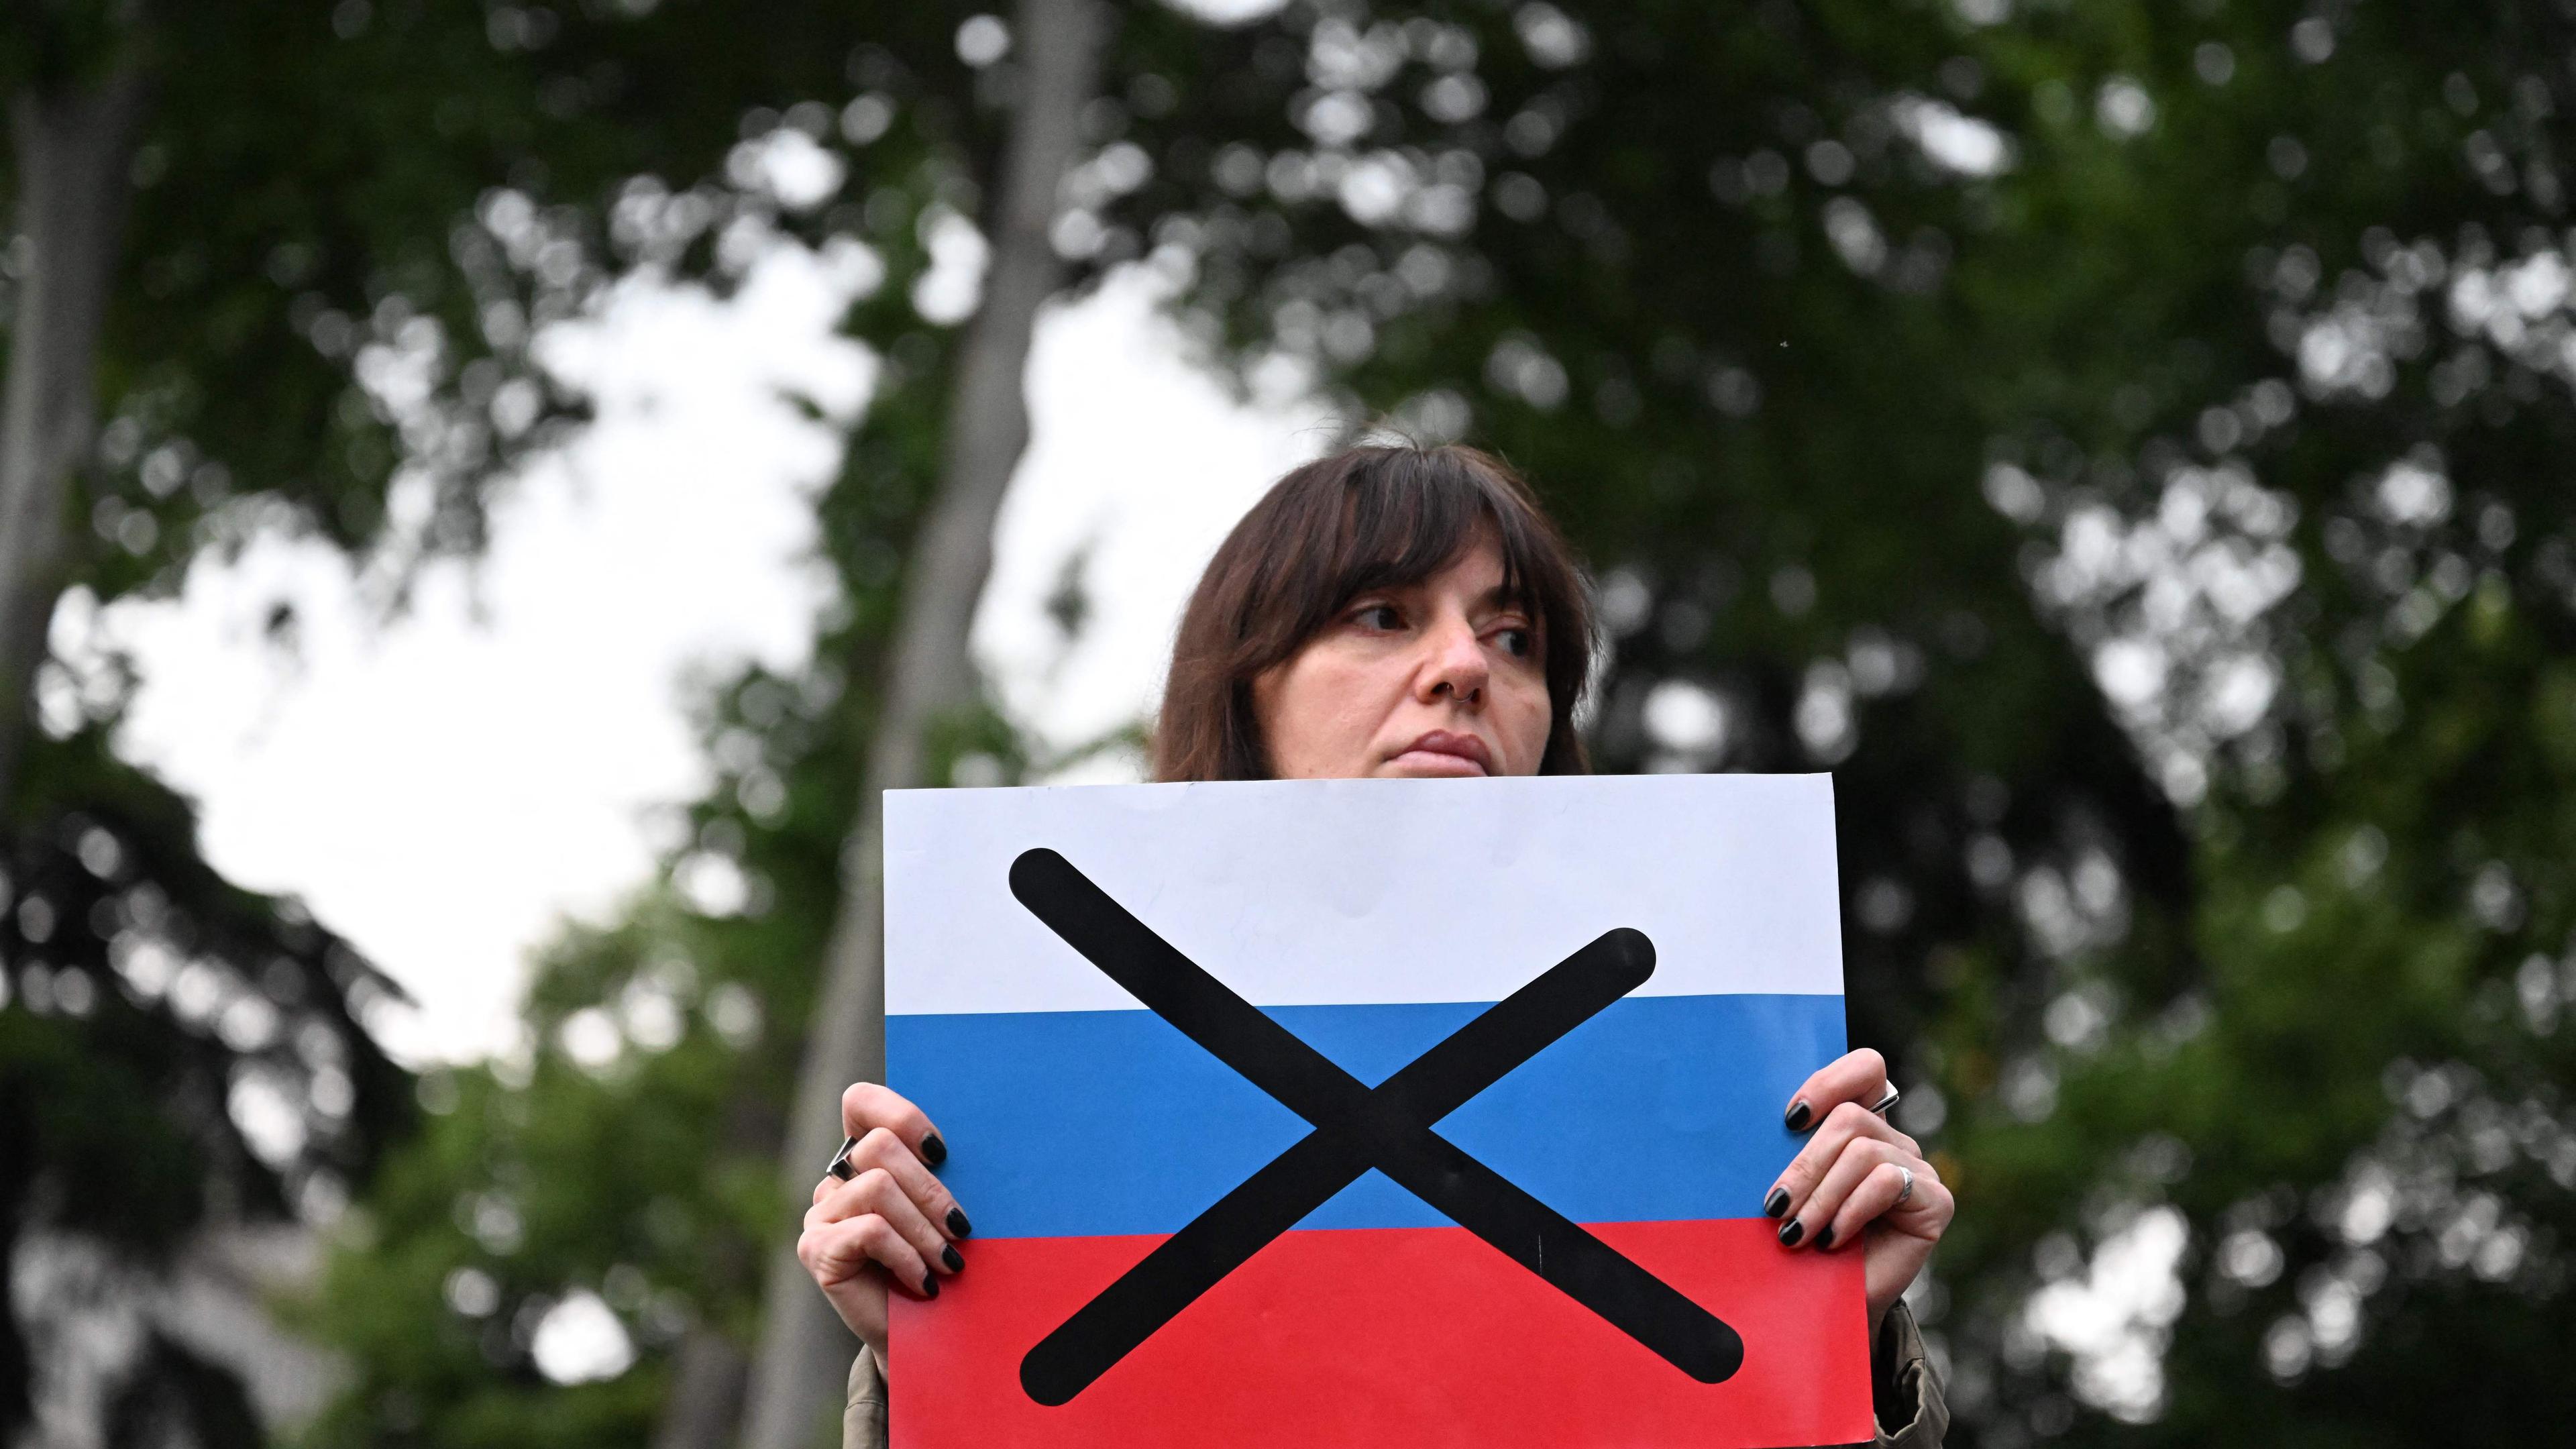 TOPSHOT - A protestor holds a crossed out flag of Russia during a rally on Friday against a  controversial "foreign influence" bill in Georgia.